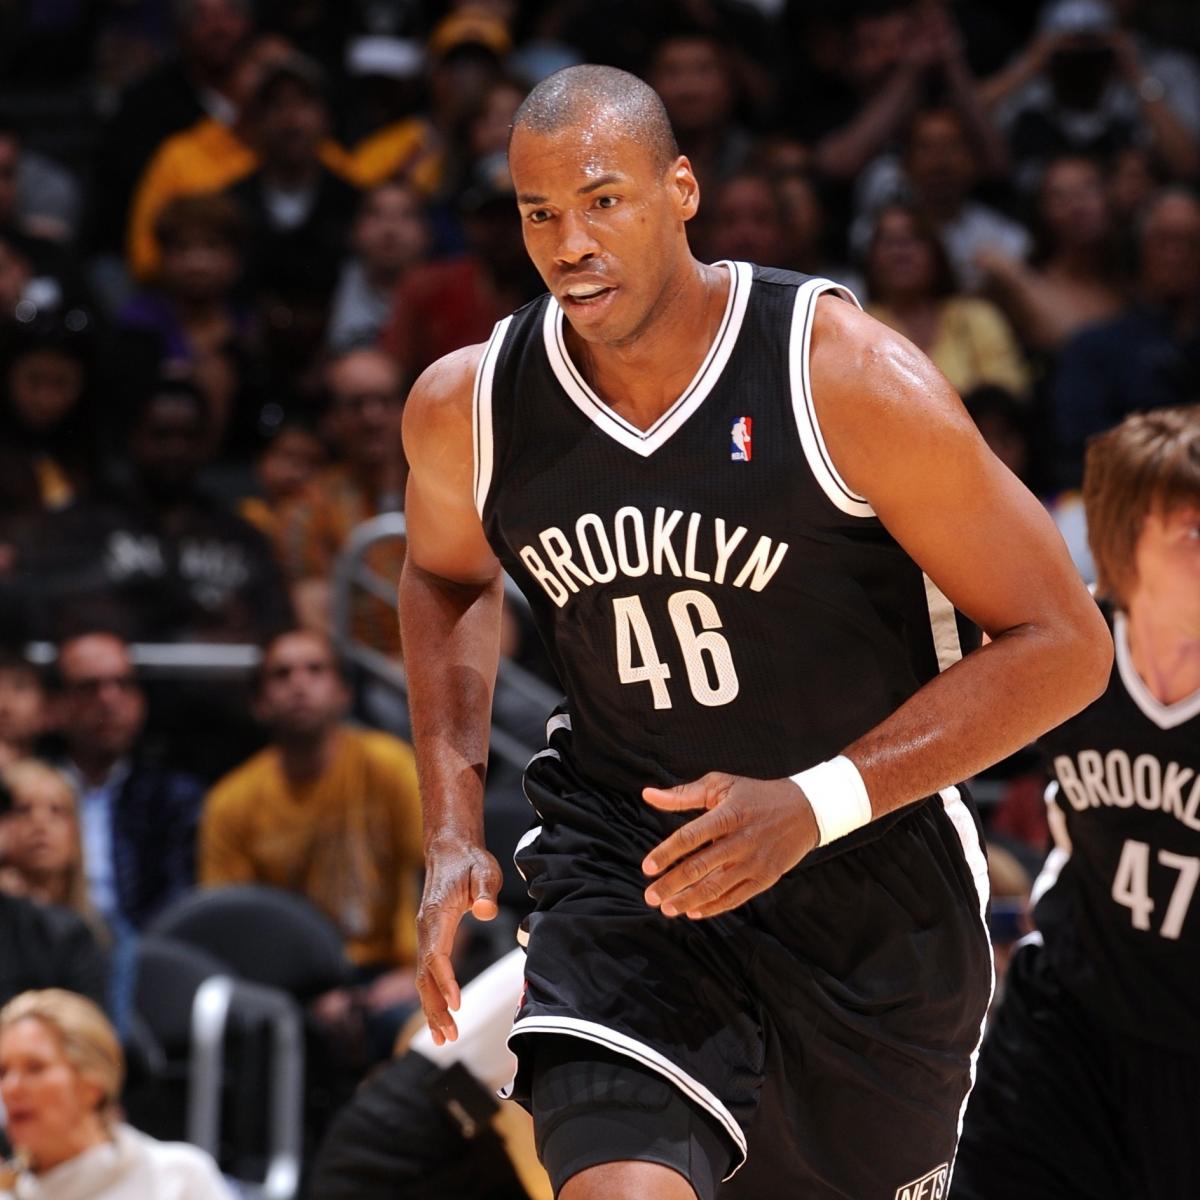 Jason Collins jersey sales spike for Washington Wizards - Outsports